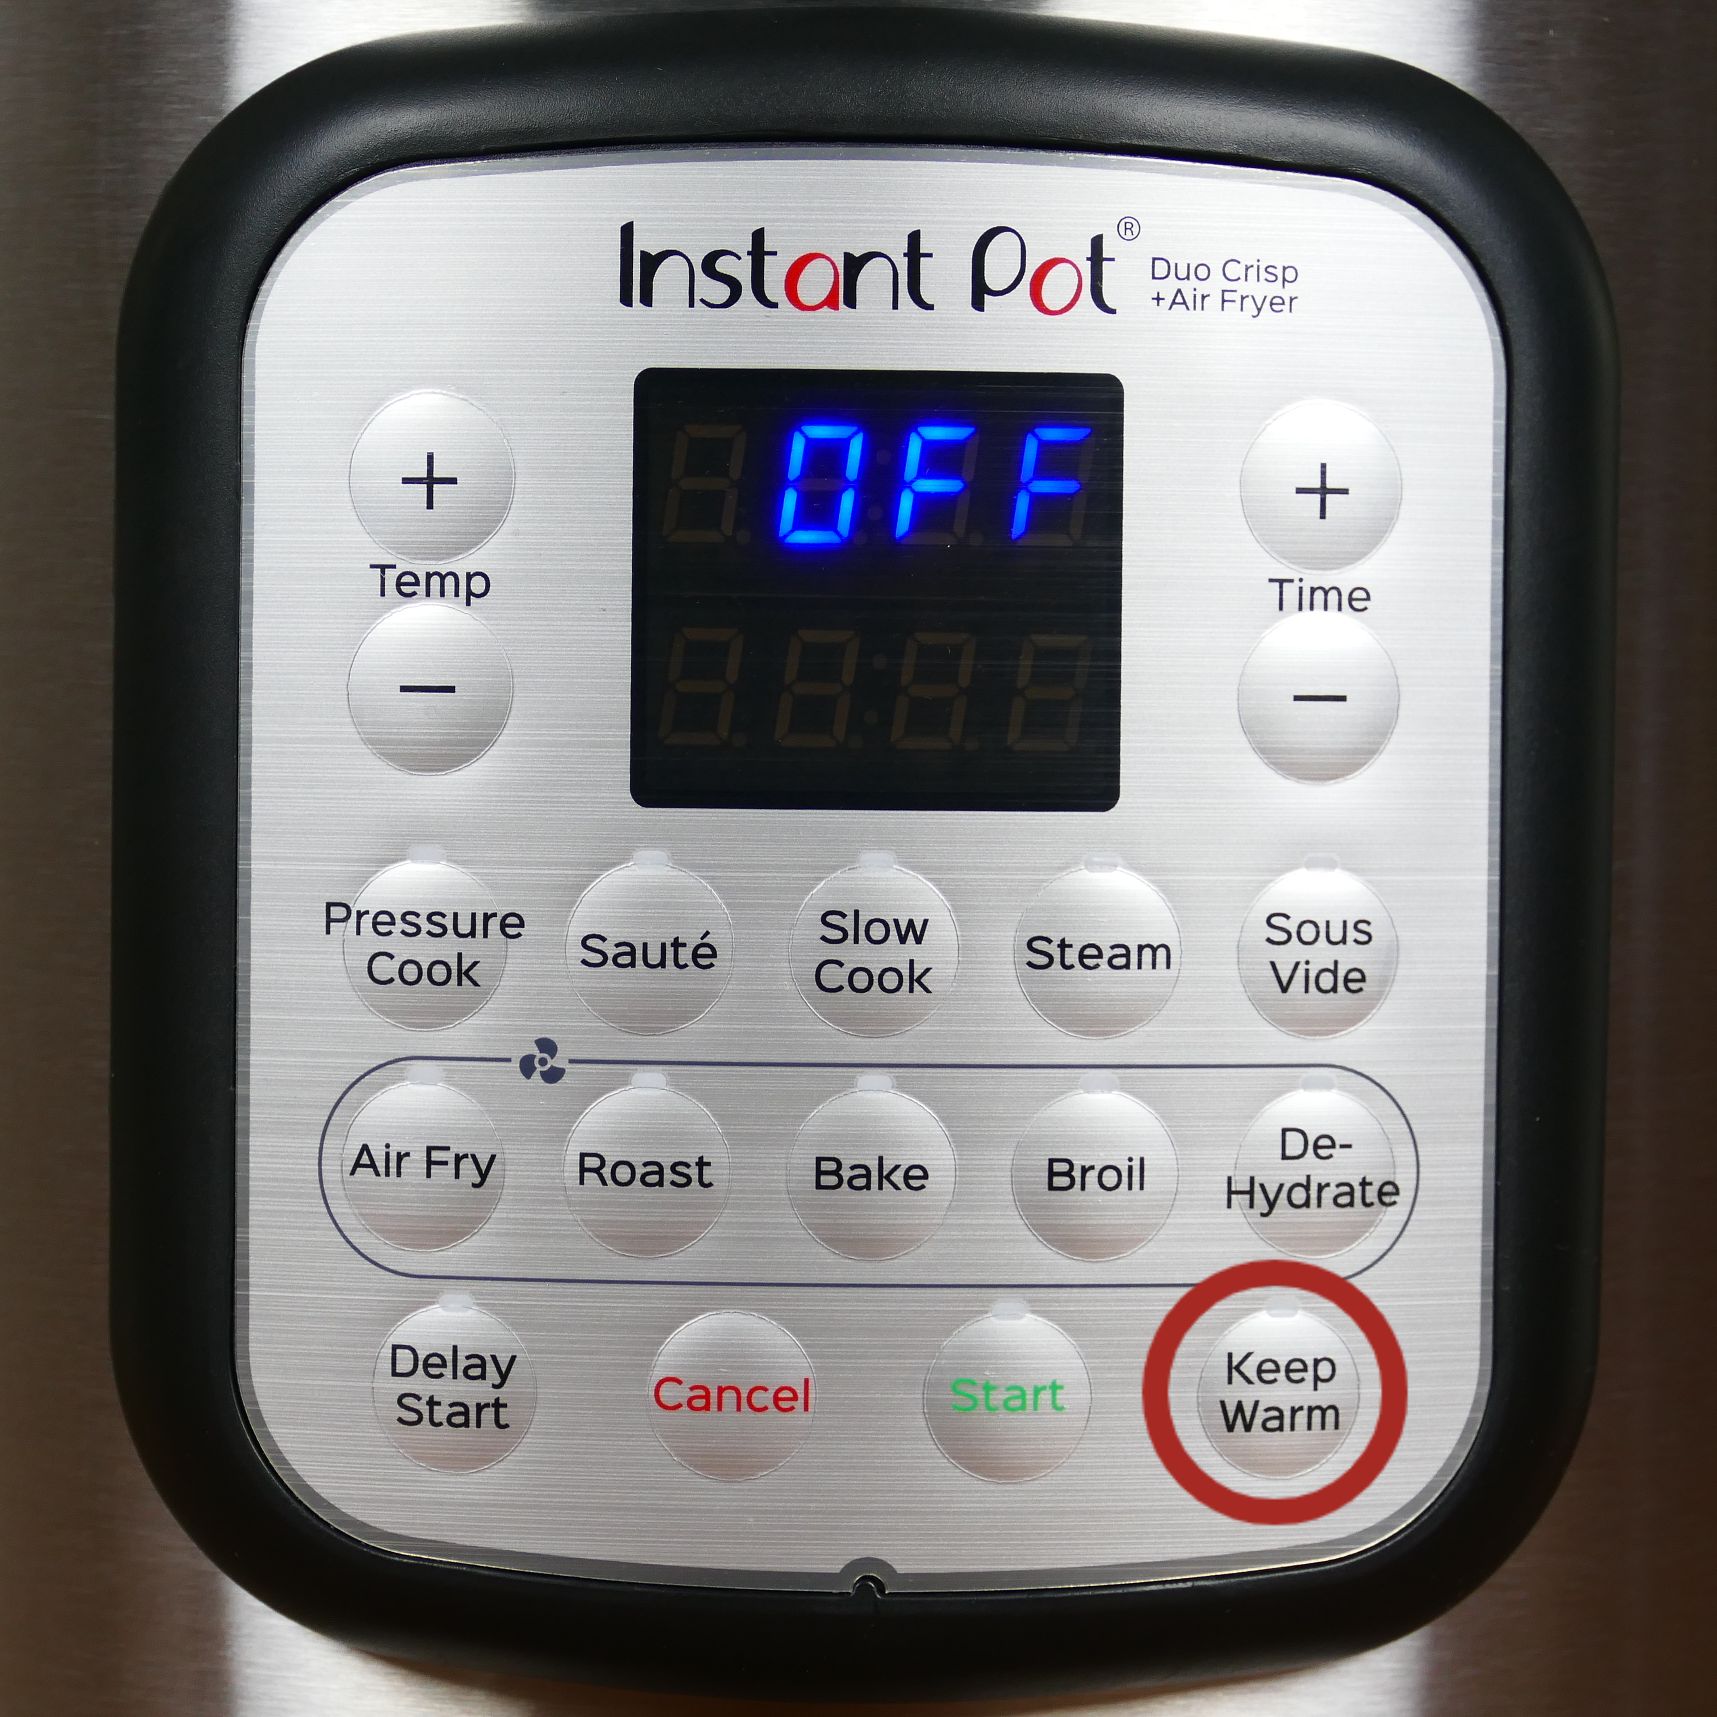 Instant Pot Duo Crisp Display Panel Keep Warm button circled in red